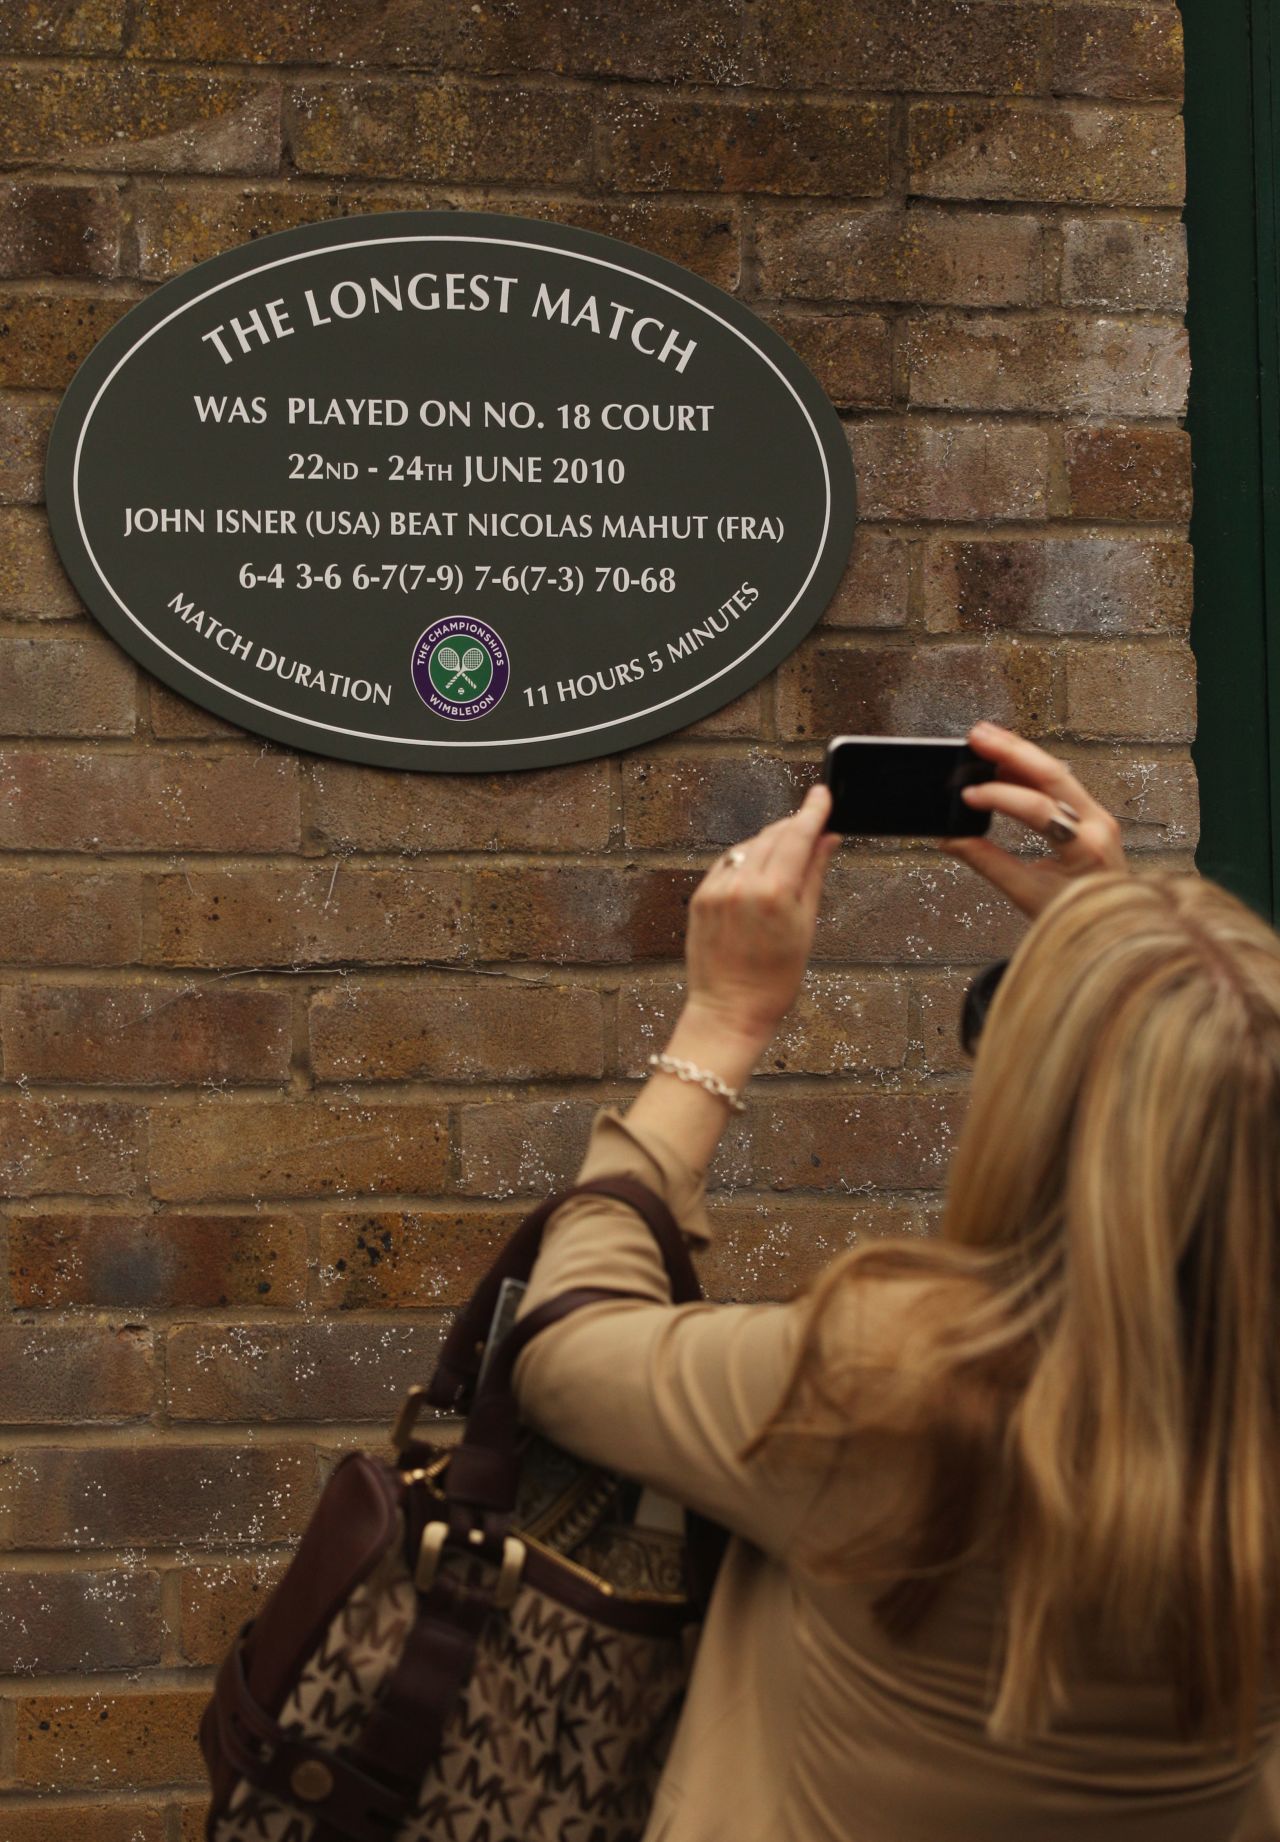 There is a plaque outside Court 18 at Wimbledon to mark Isner and Mahut's slice of history.